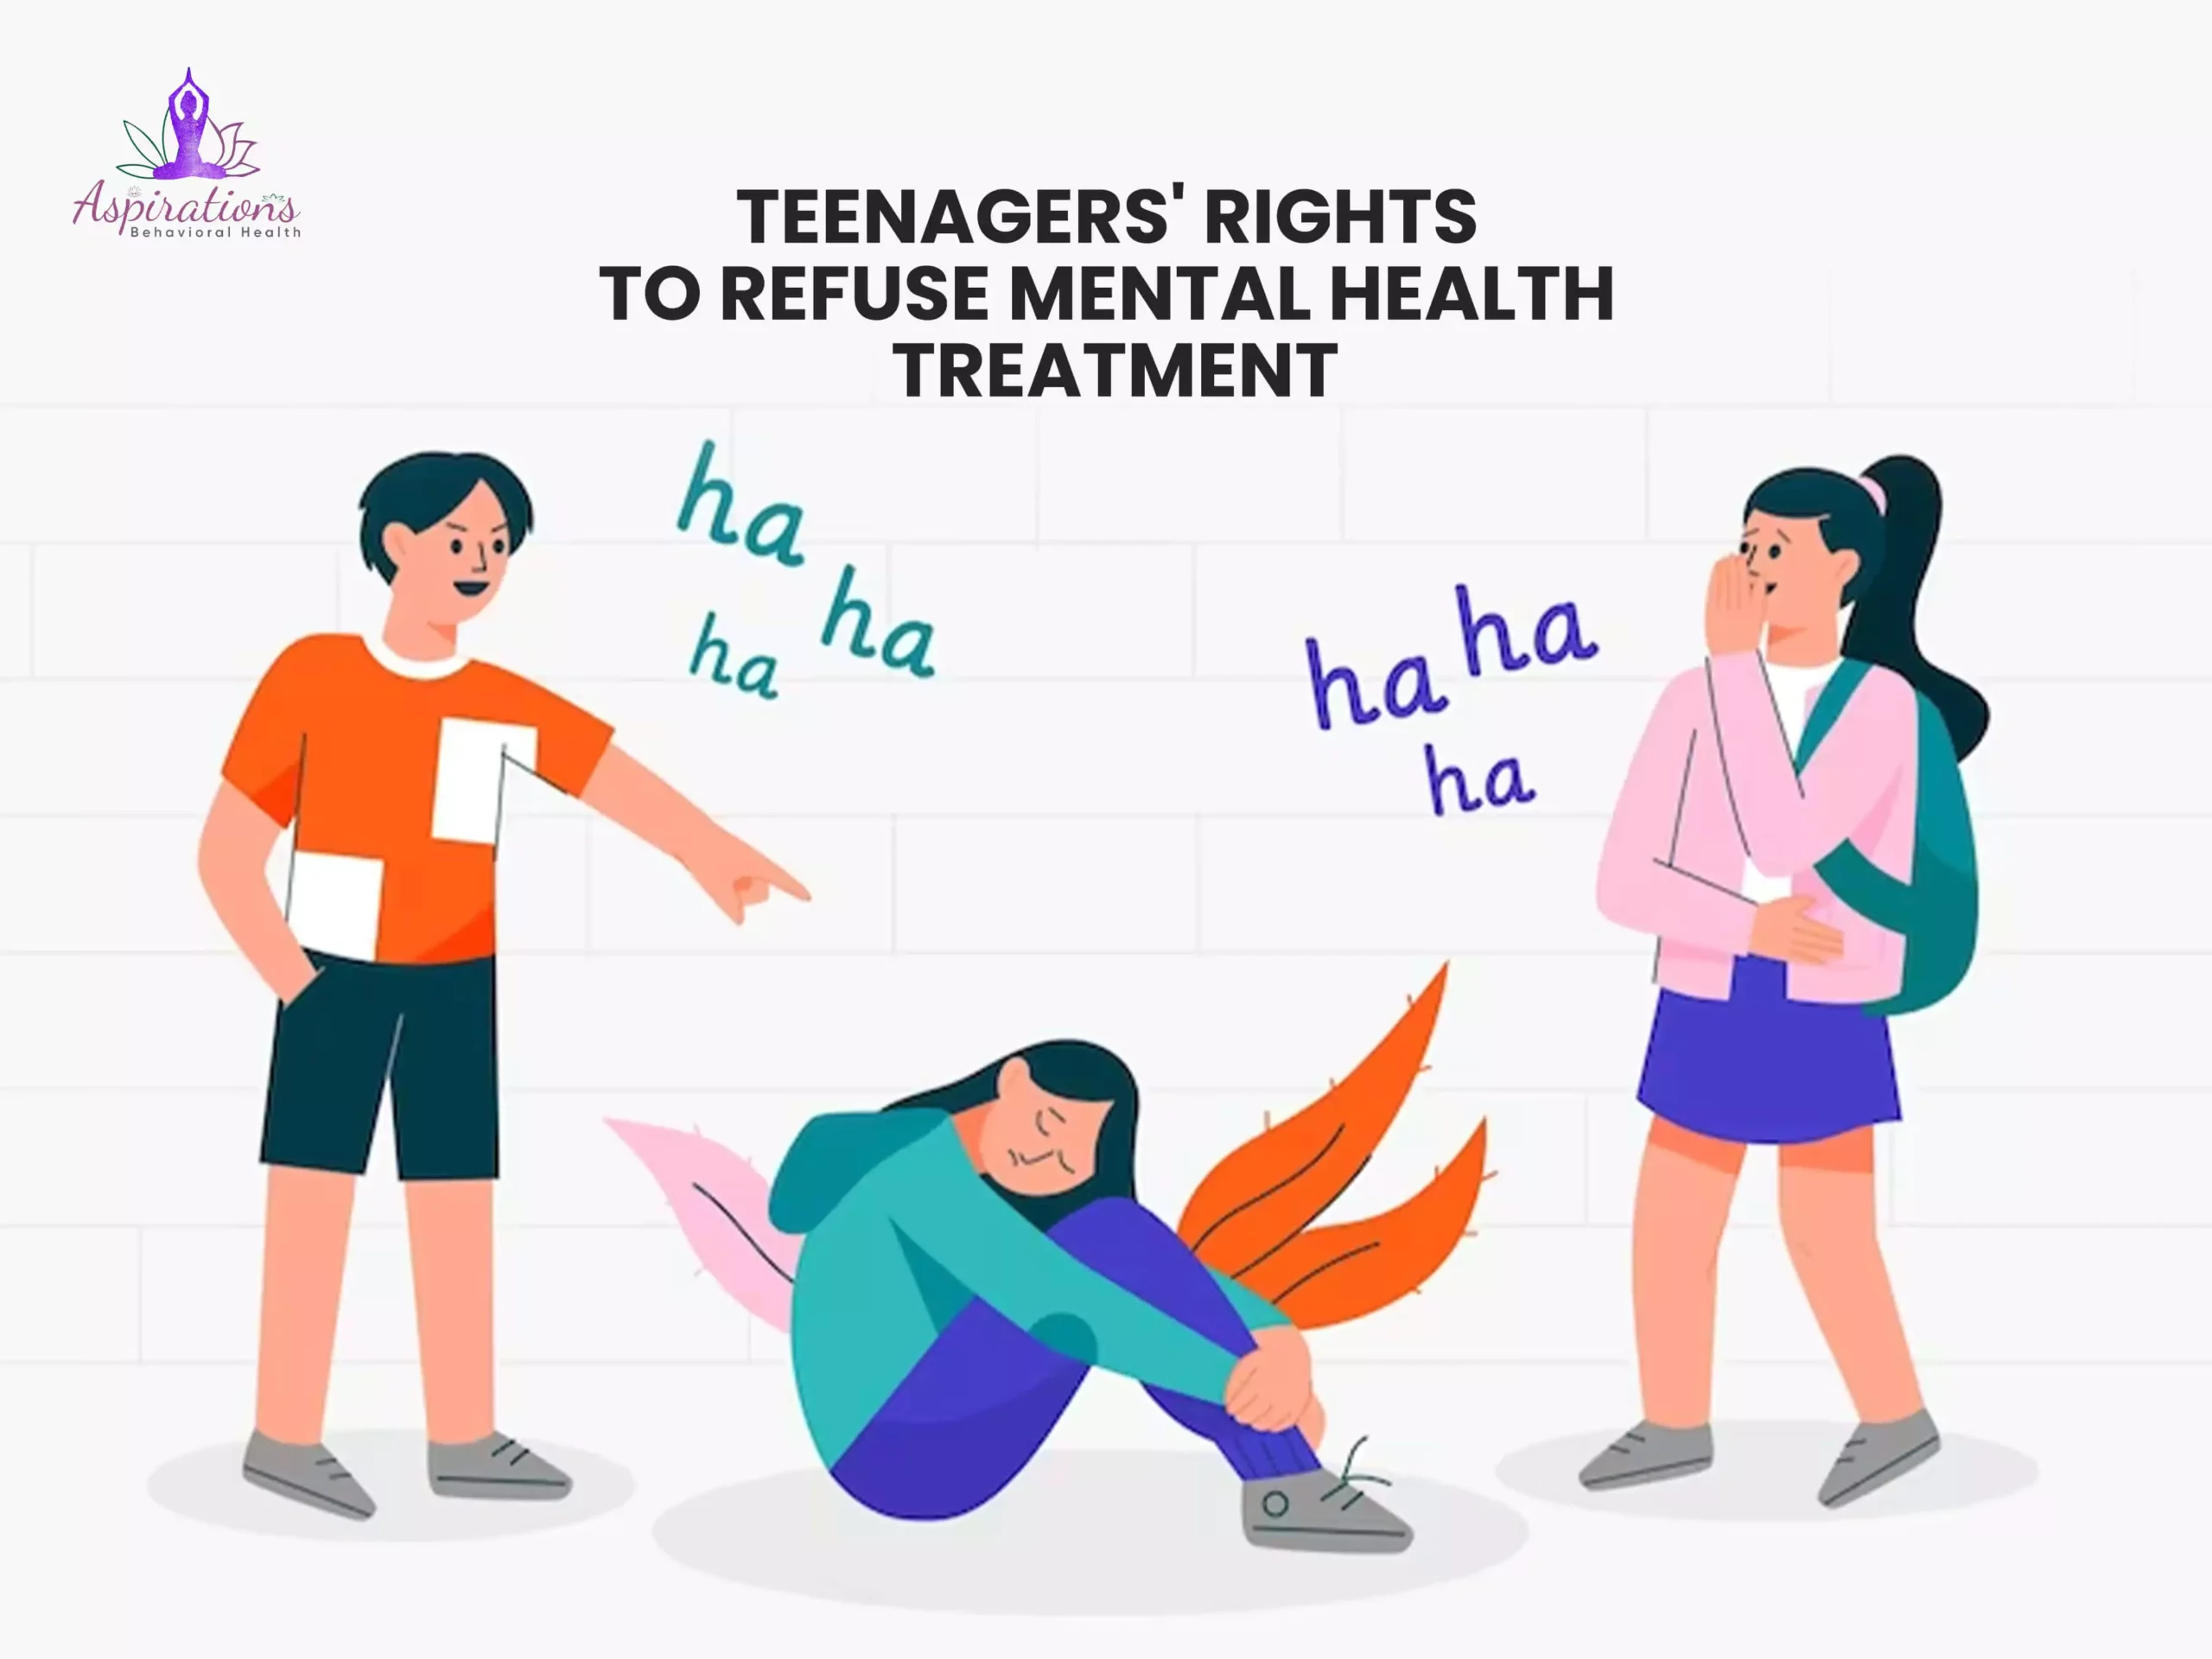 Teenagers' Rights to Refuse Mental Health Treatment